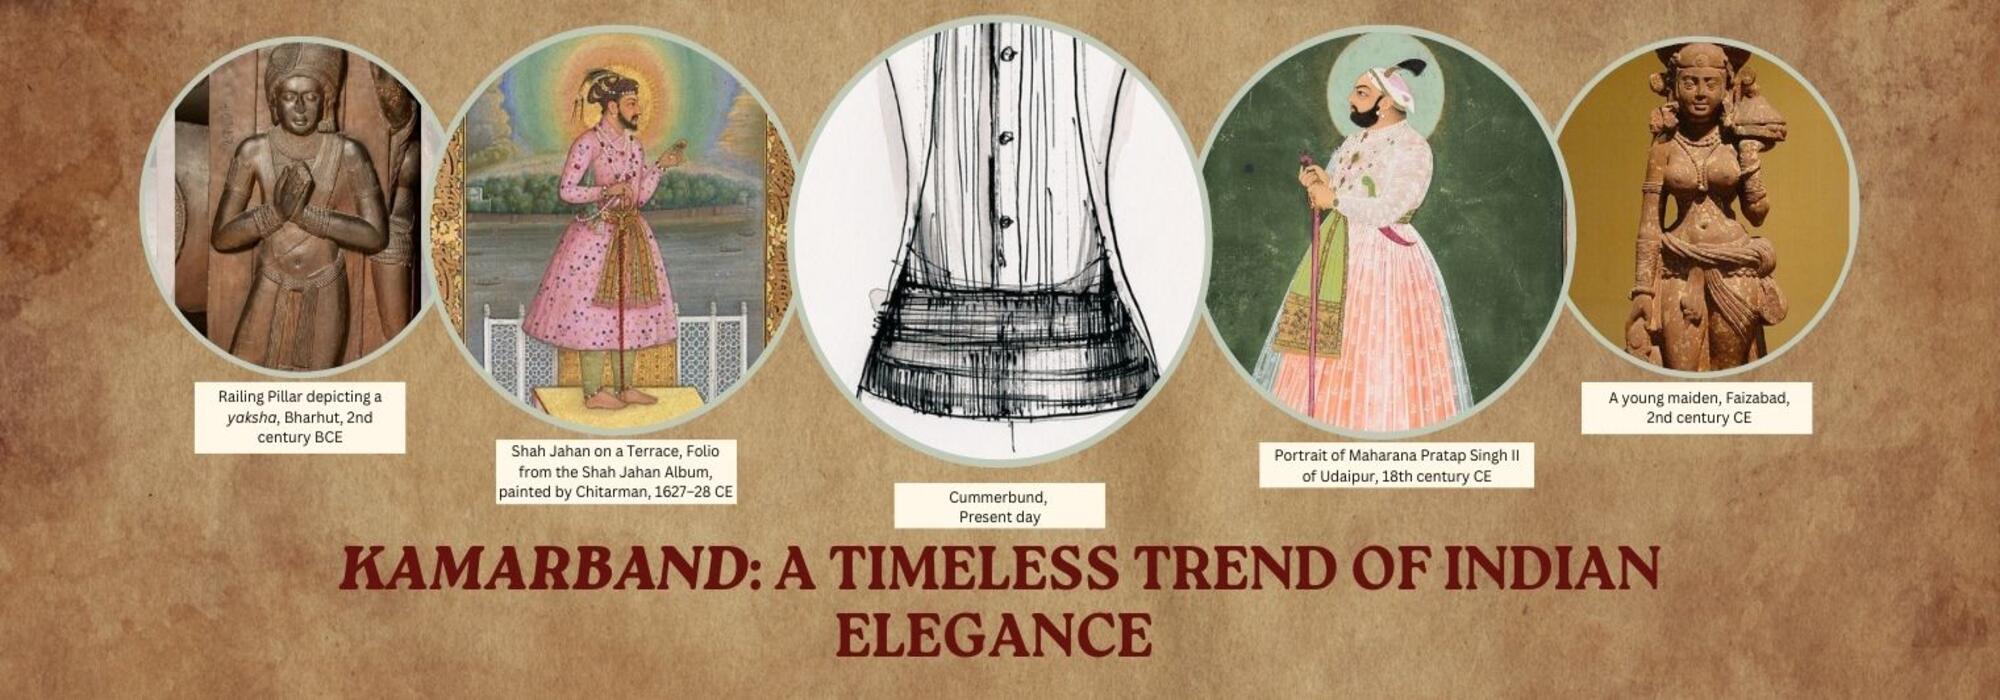 The Kamarband: A Timeless Trend of Indian Elegance